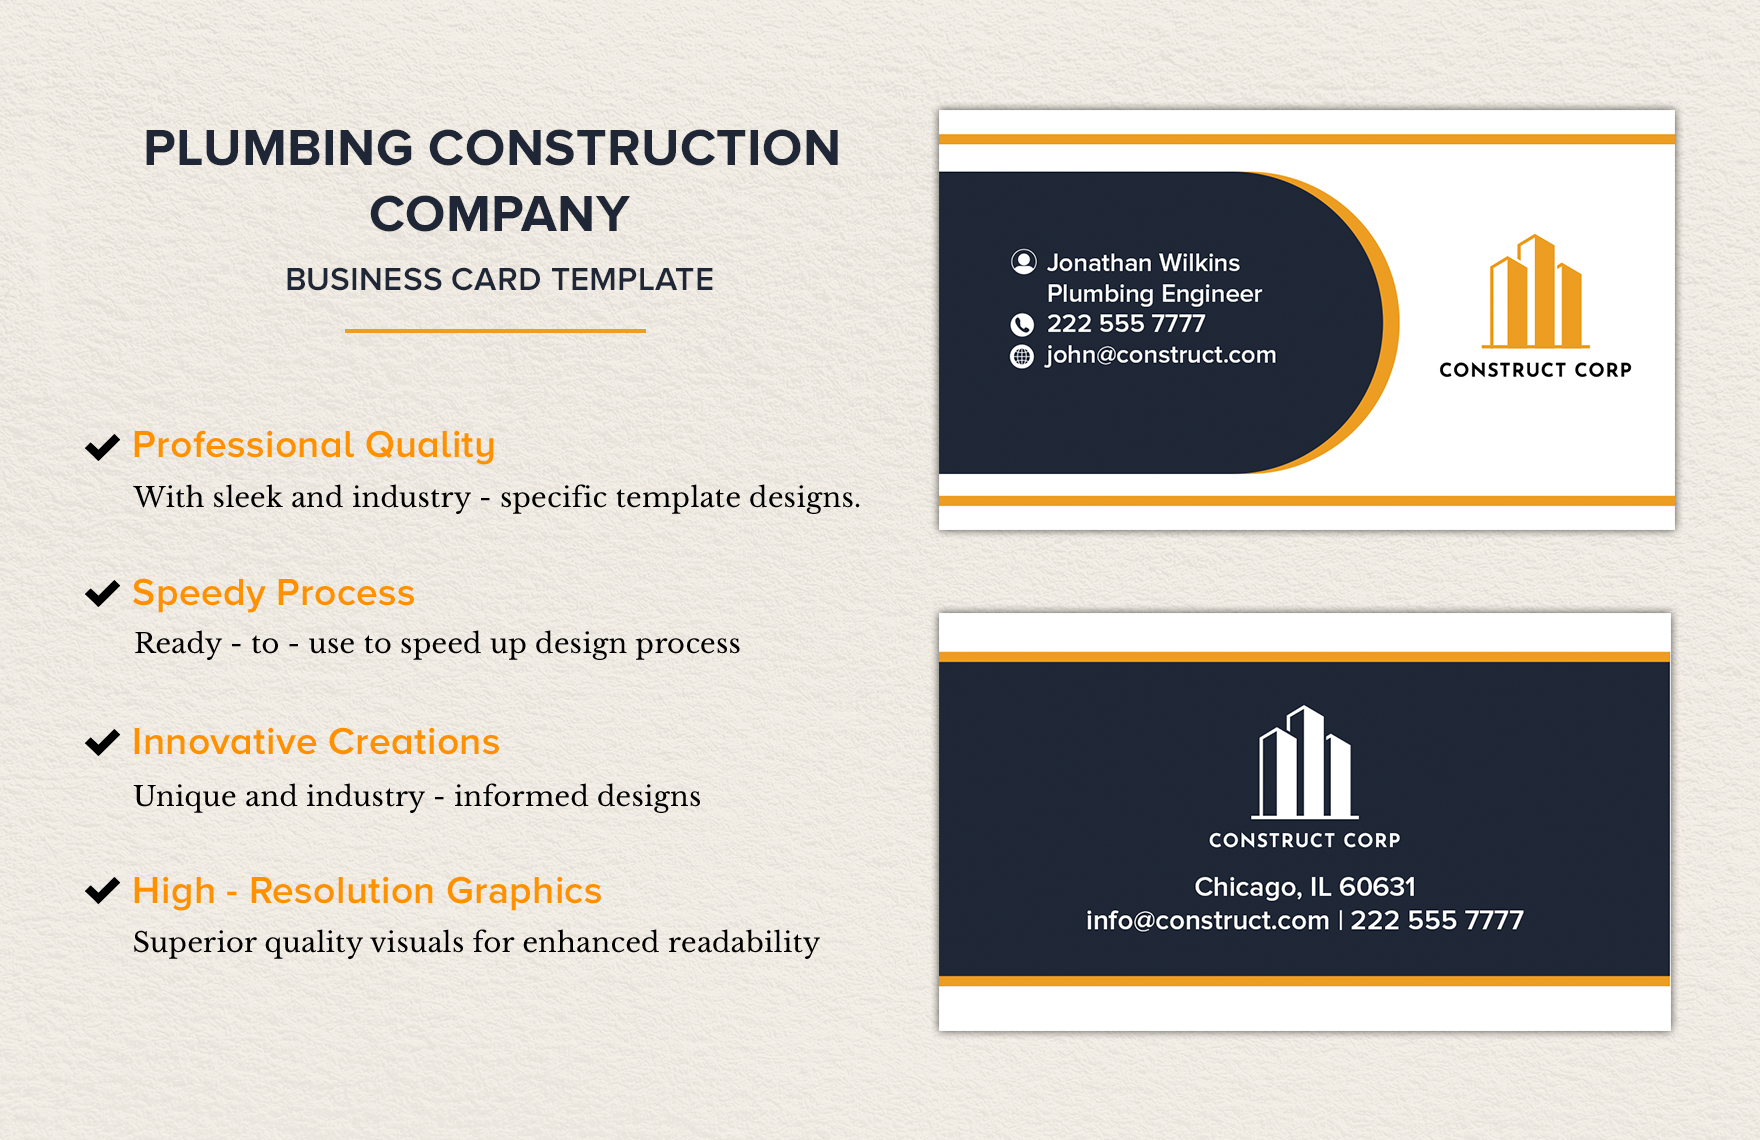 Plumbing Construction Company Business Card Template